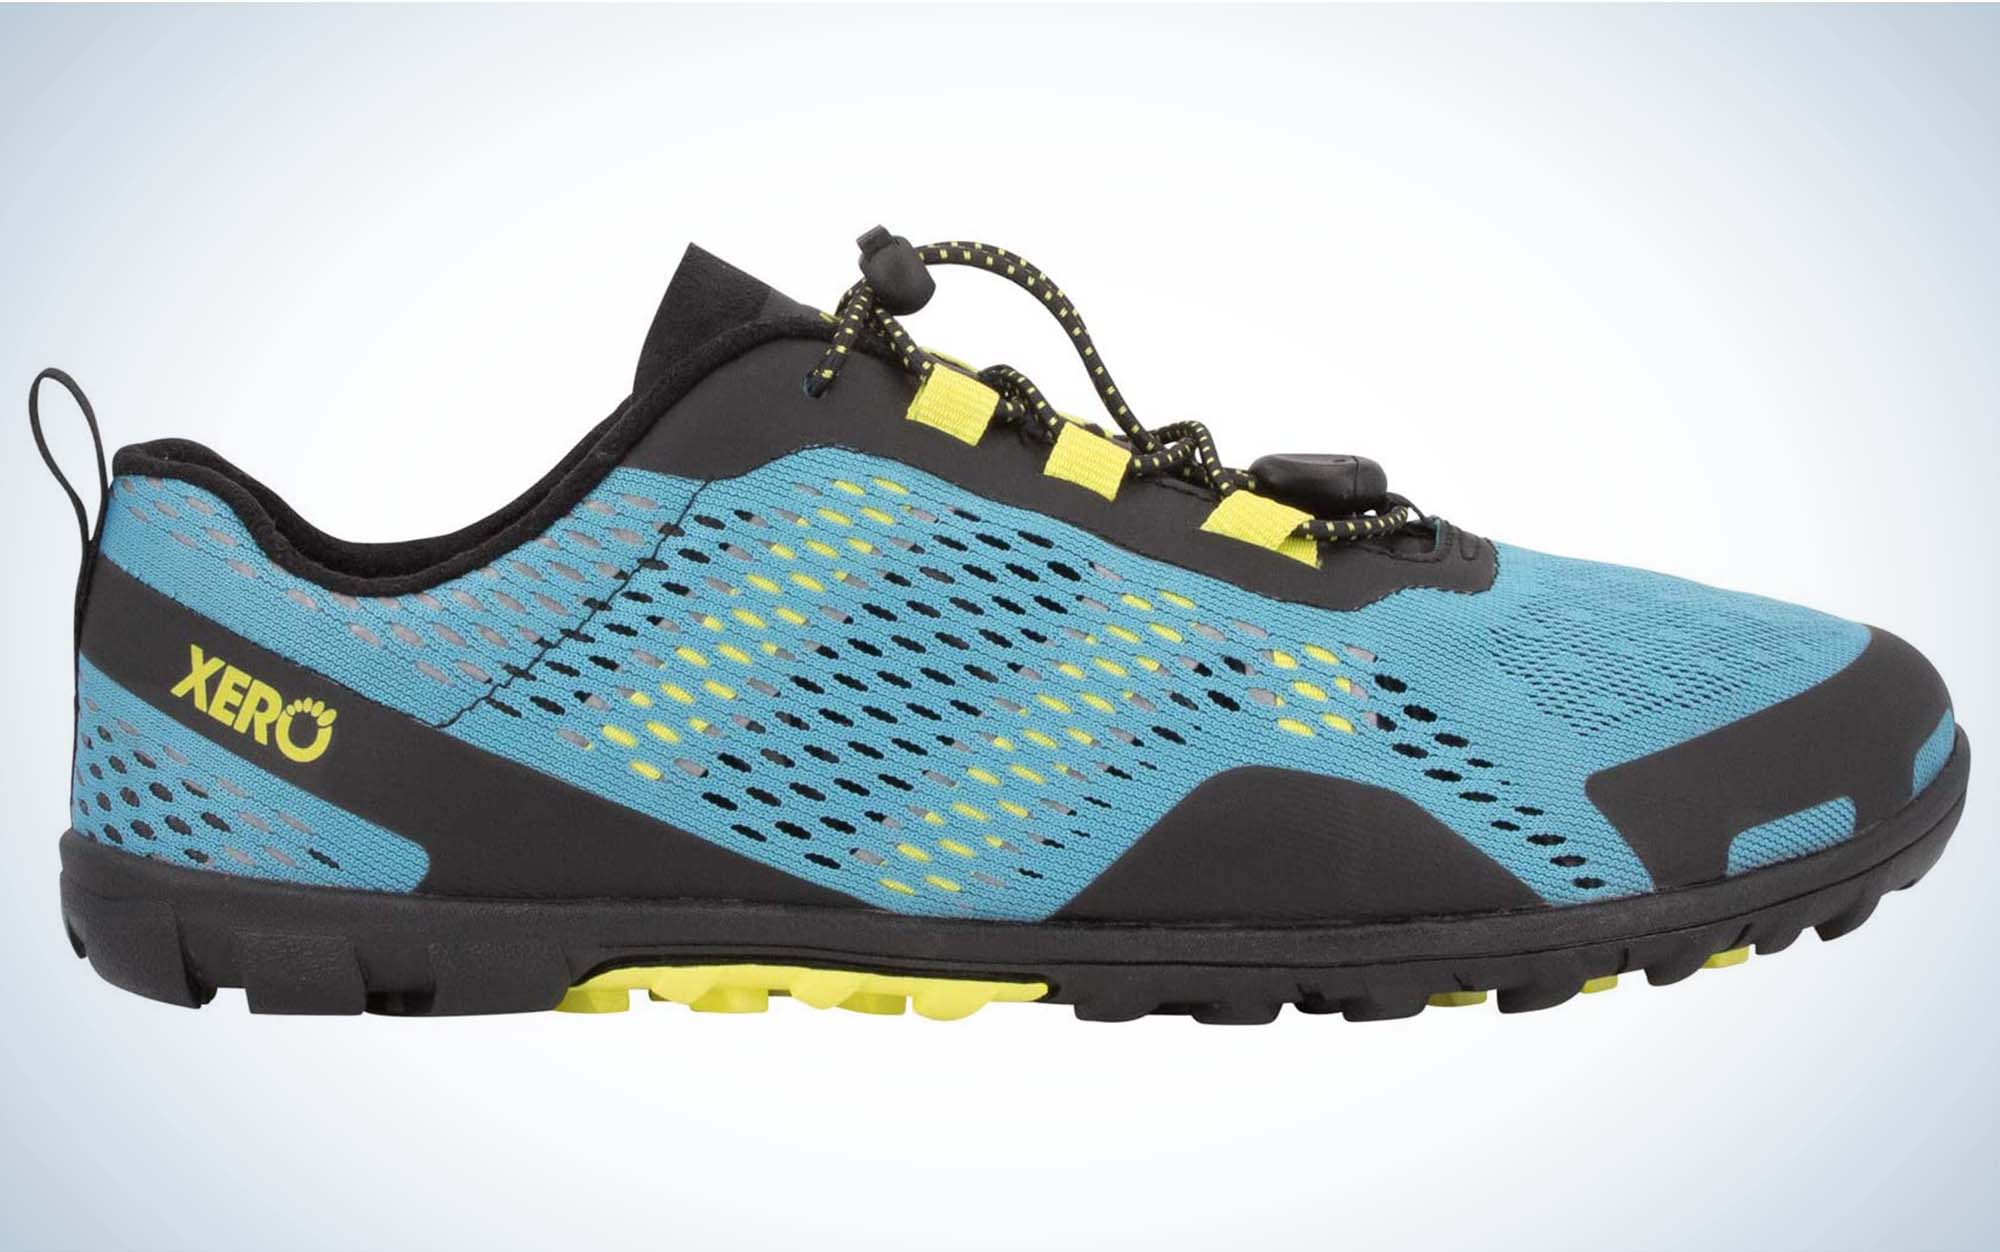 The XeroShoes Aqua X Sport are the best minimalist water shoes for hiking.